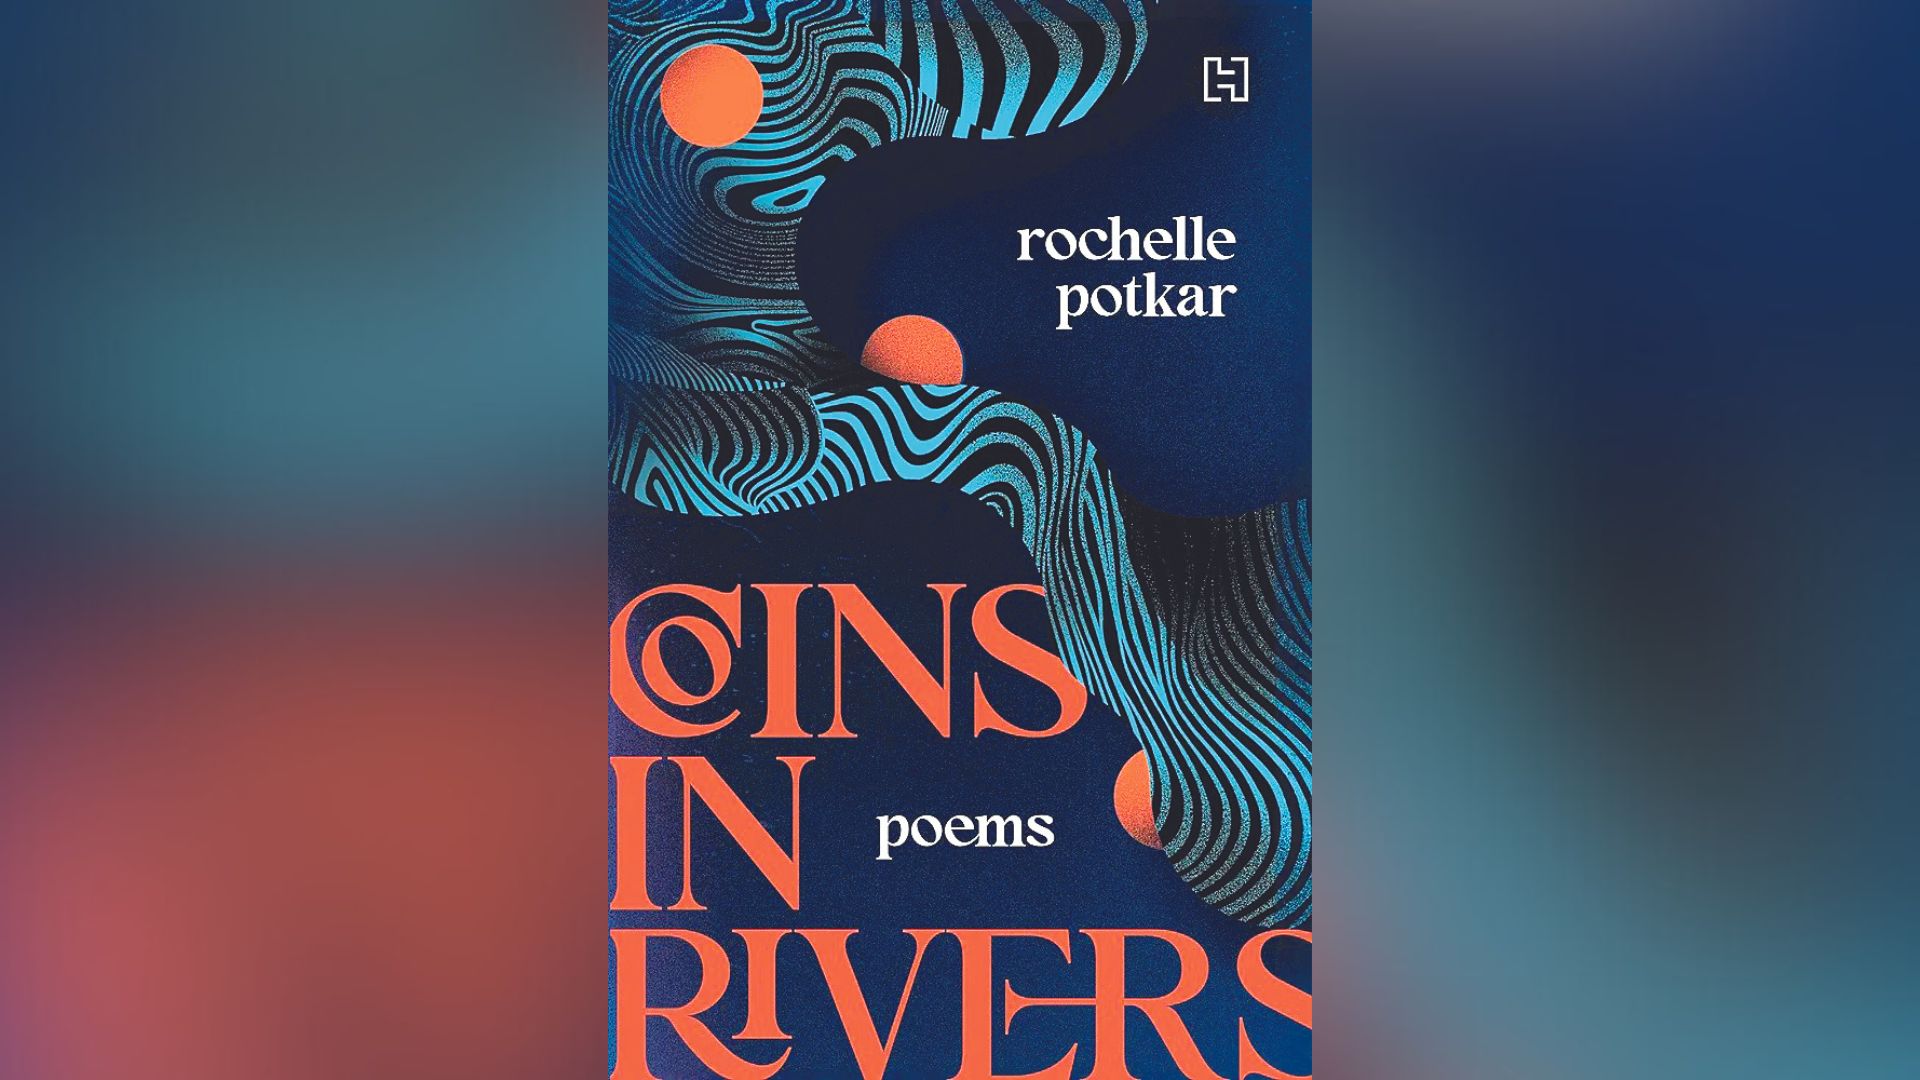 Rochelle Potkar’s ‘Coins in Rivers’ manifests wit